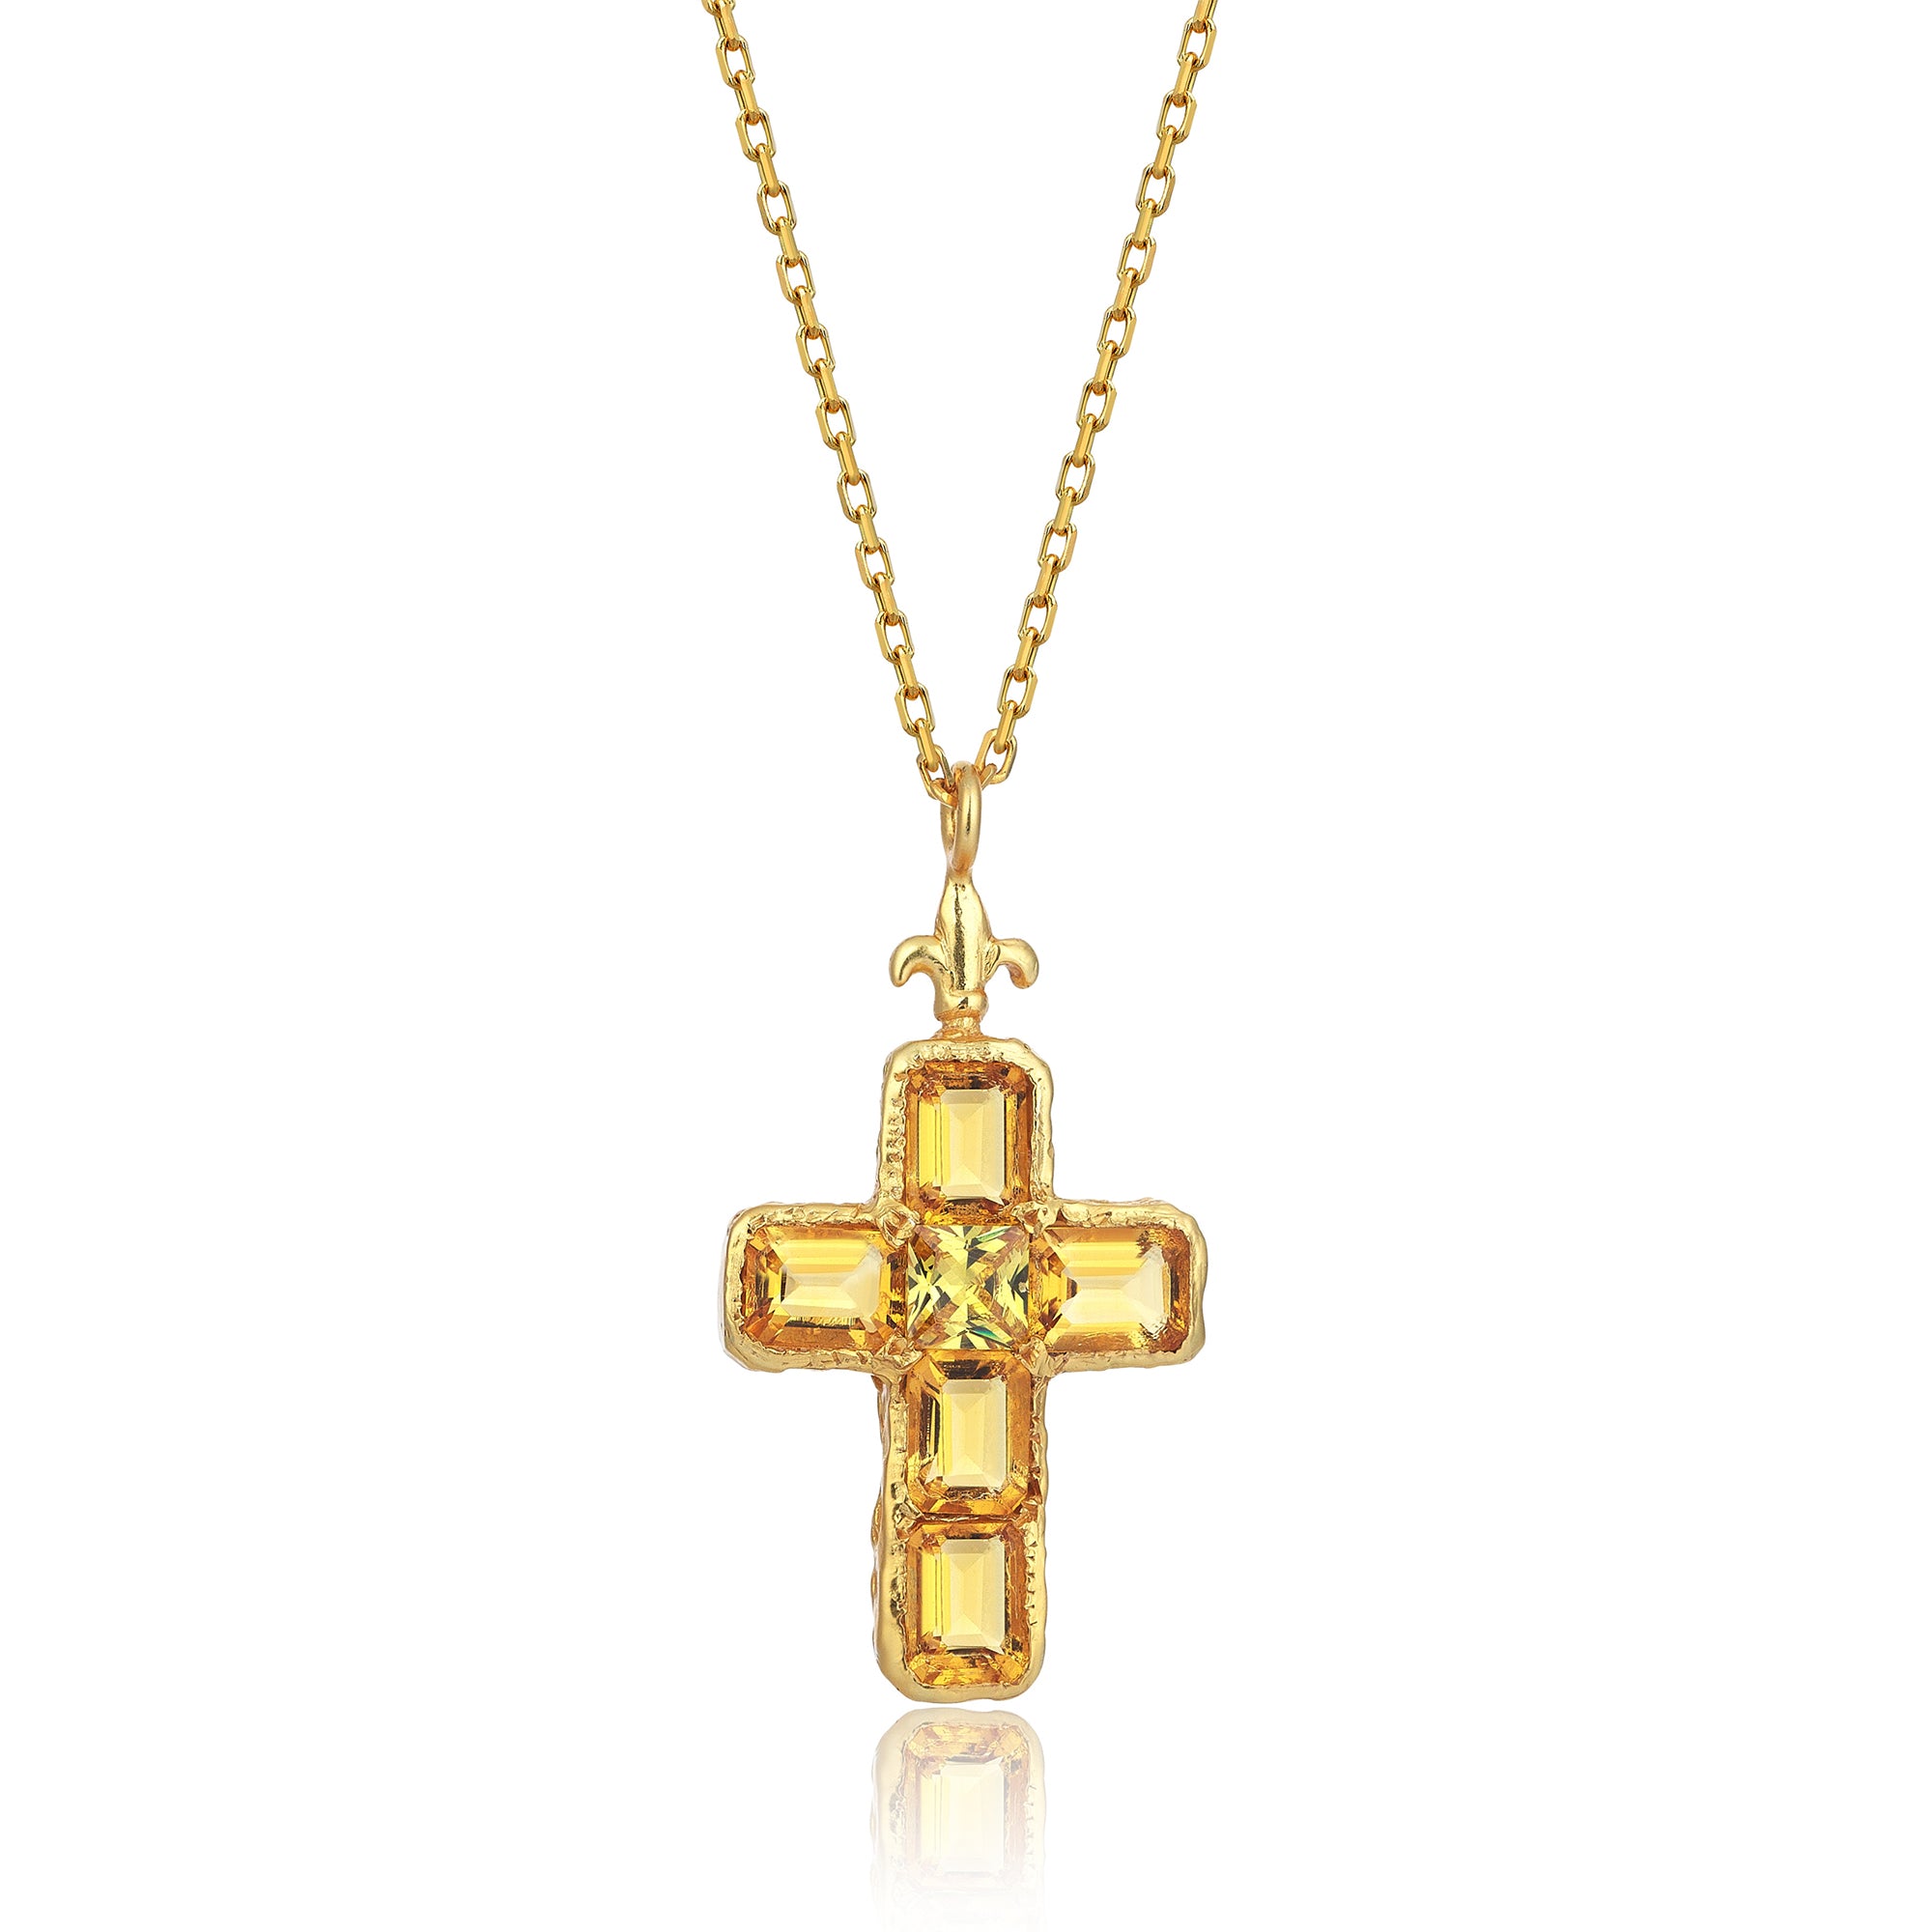 THE GOLD CROSS